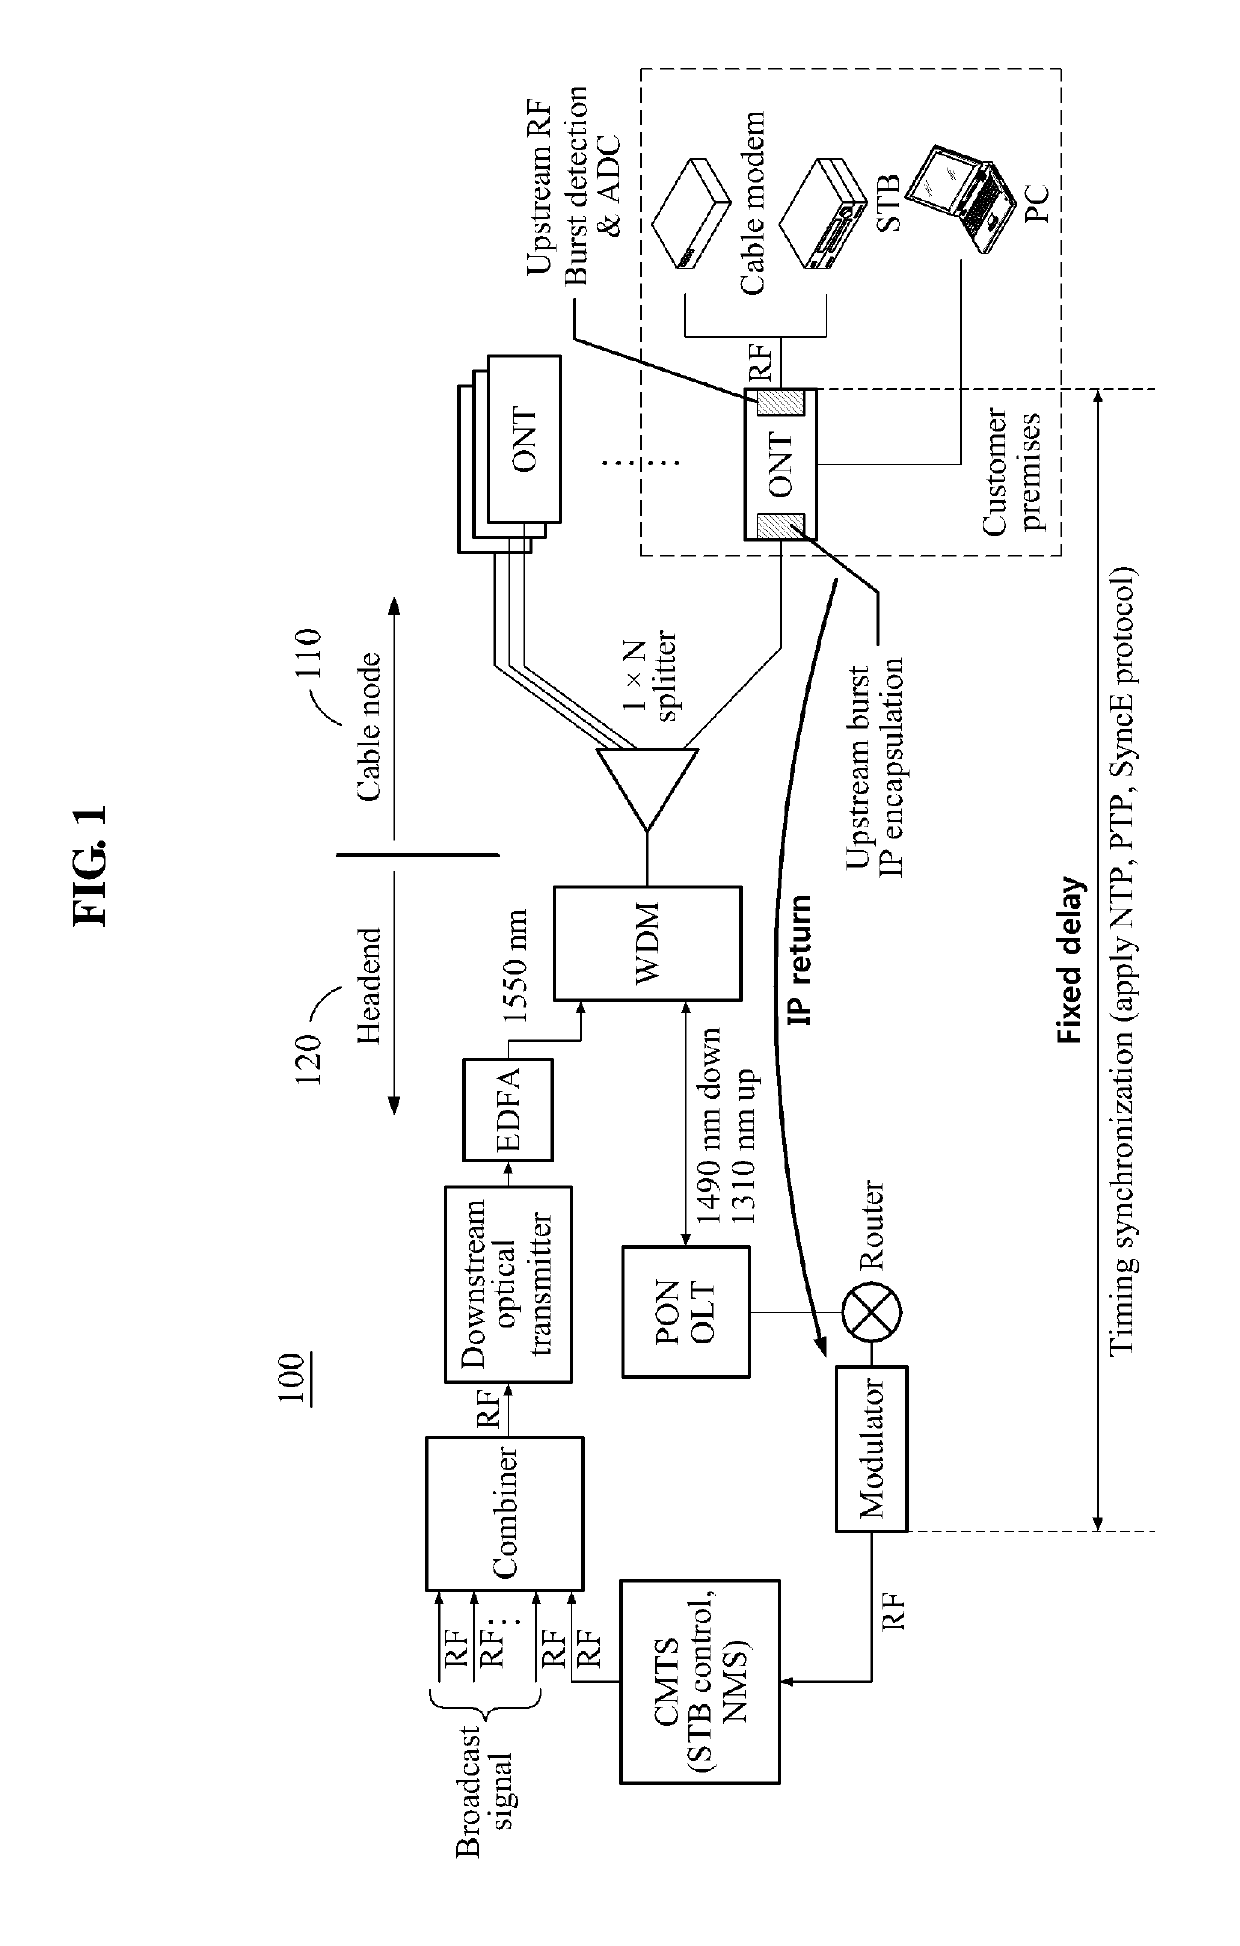 Apparatus and method for IP based transmission of upstream RF signal in cable broadcasting network